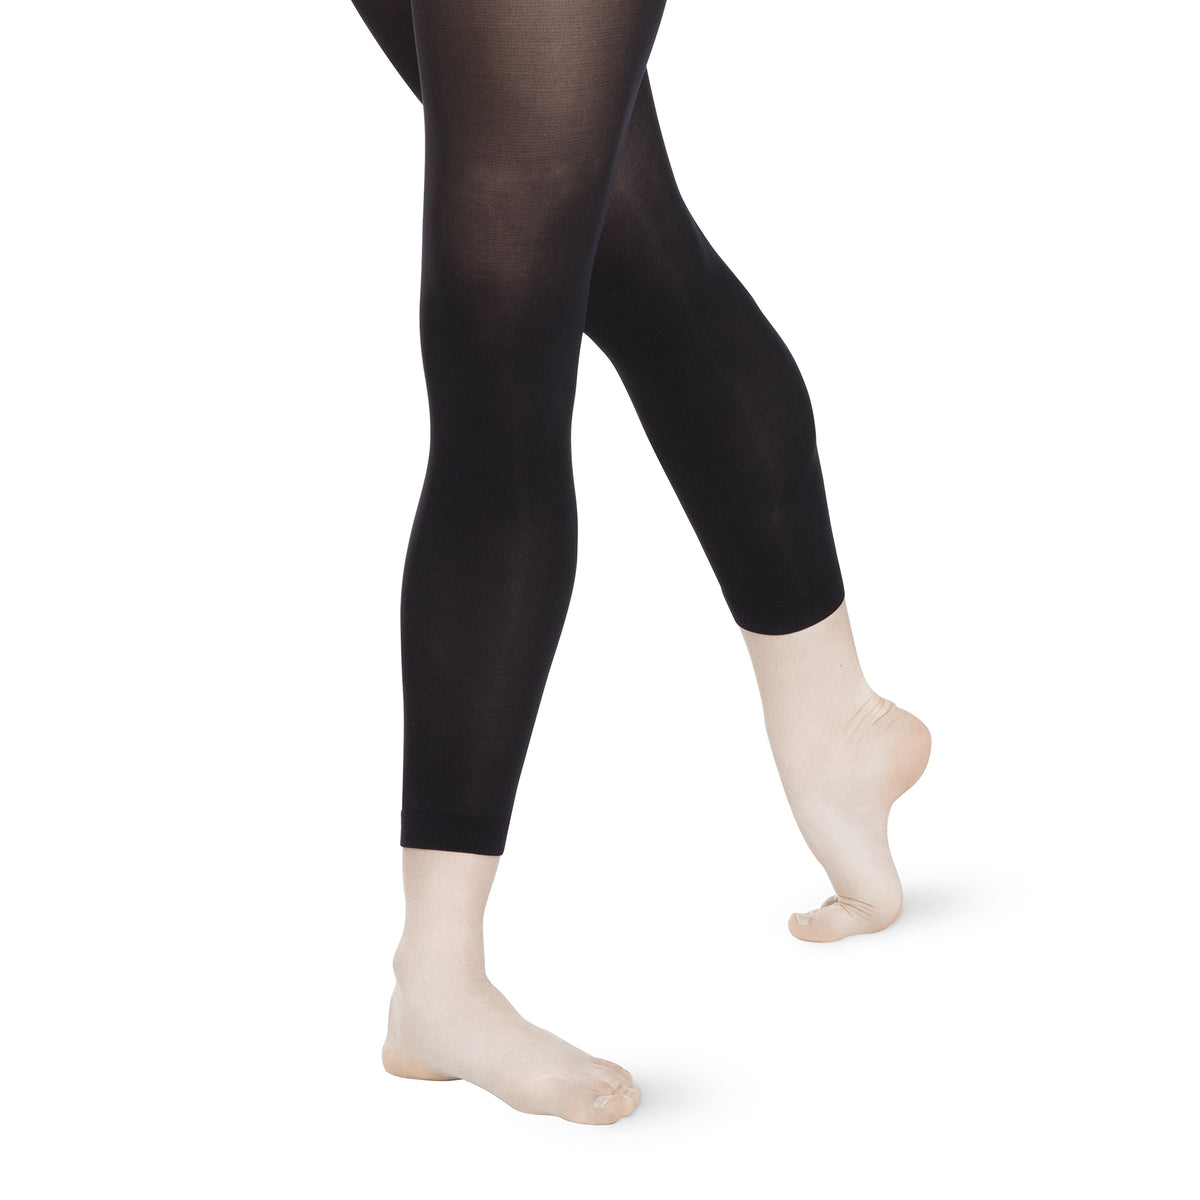 Women's Footless Dance Tights by Pridance (8122/50), : The  ballet experts